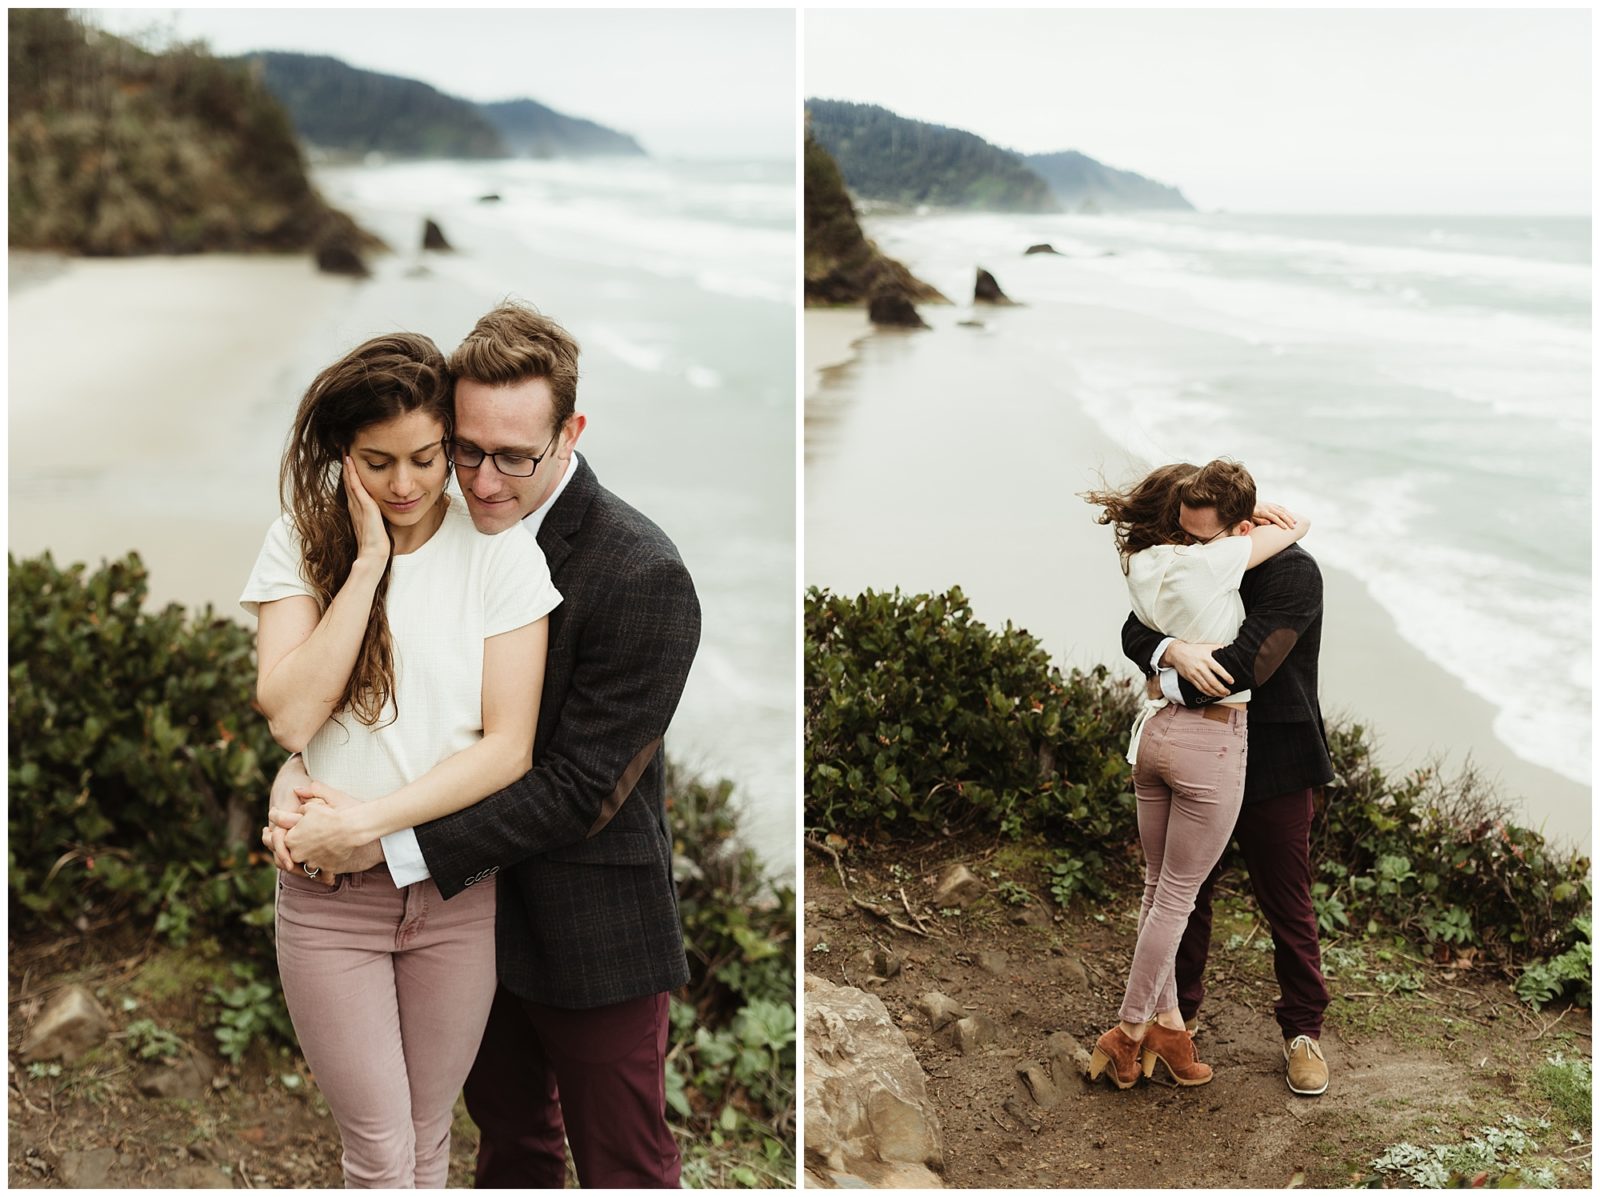 Gorgeous couple embracing on cliffside at Hug Point on the Oregon Coast during engagement shoot